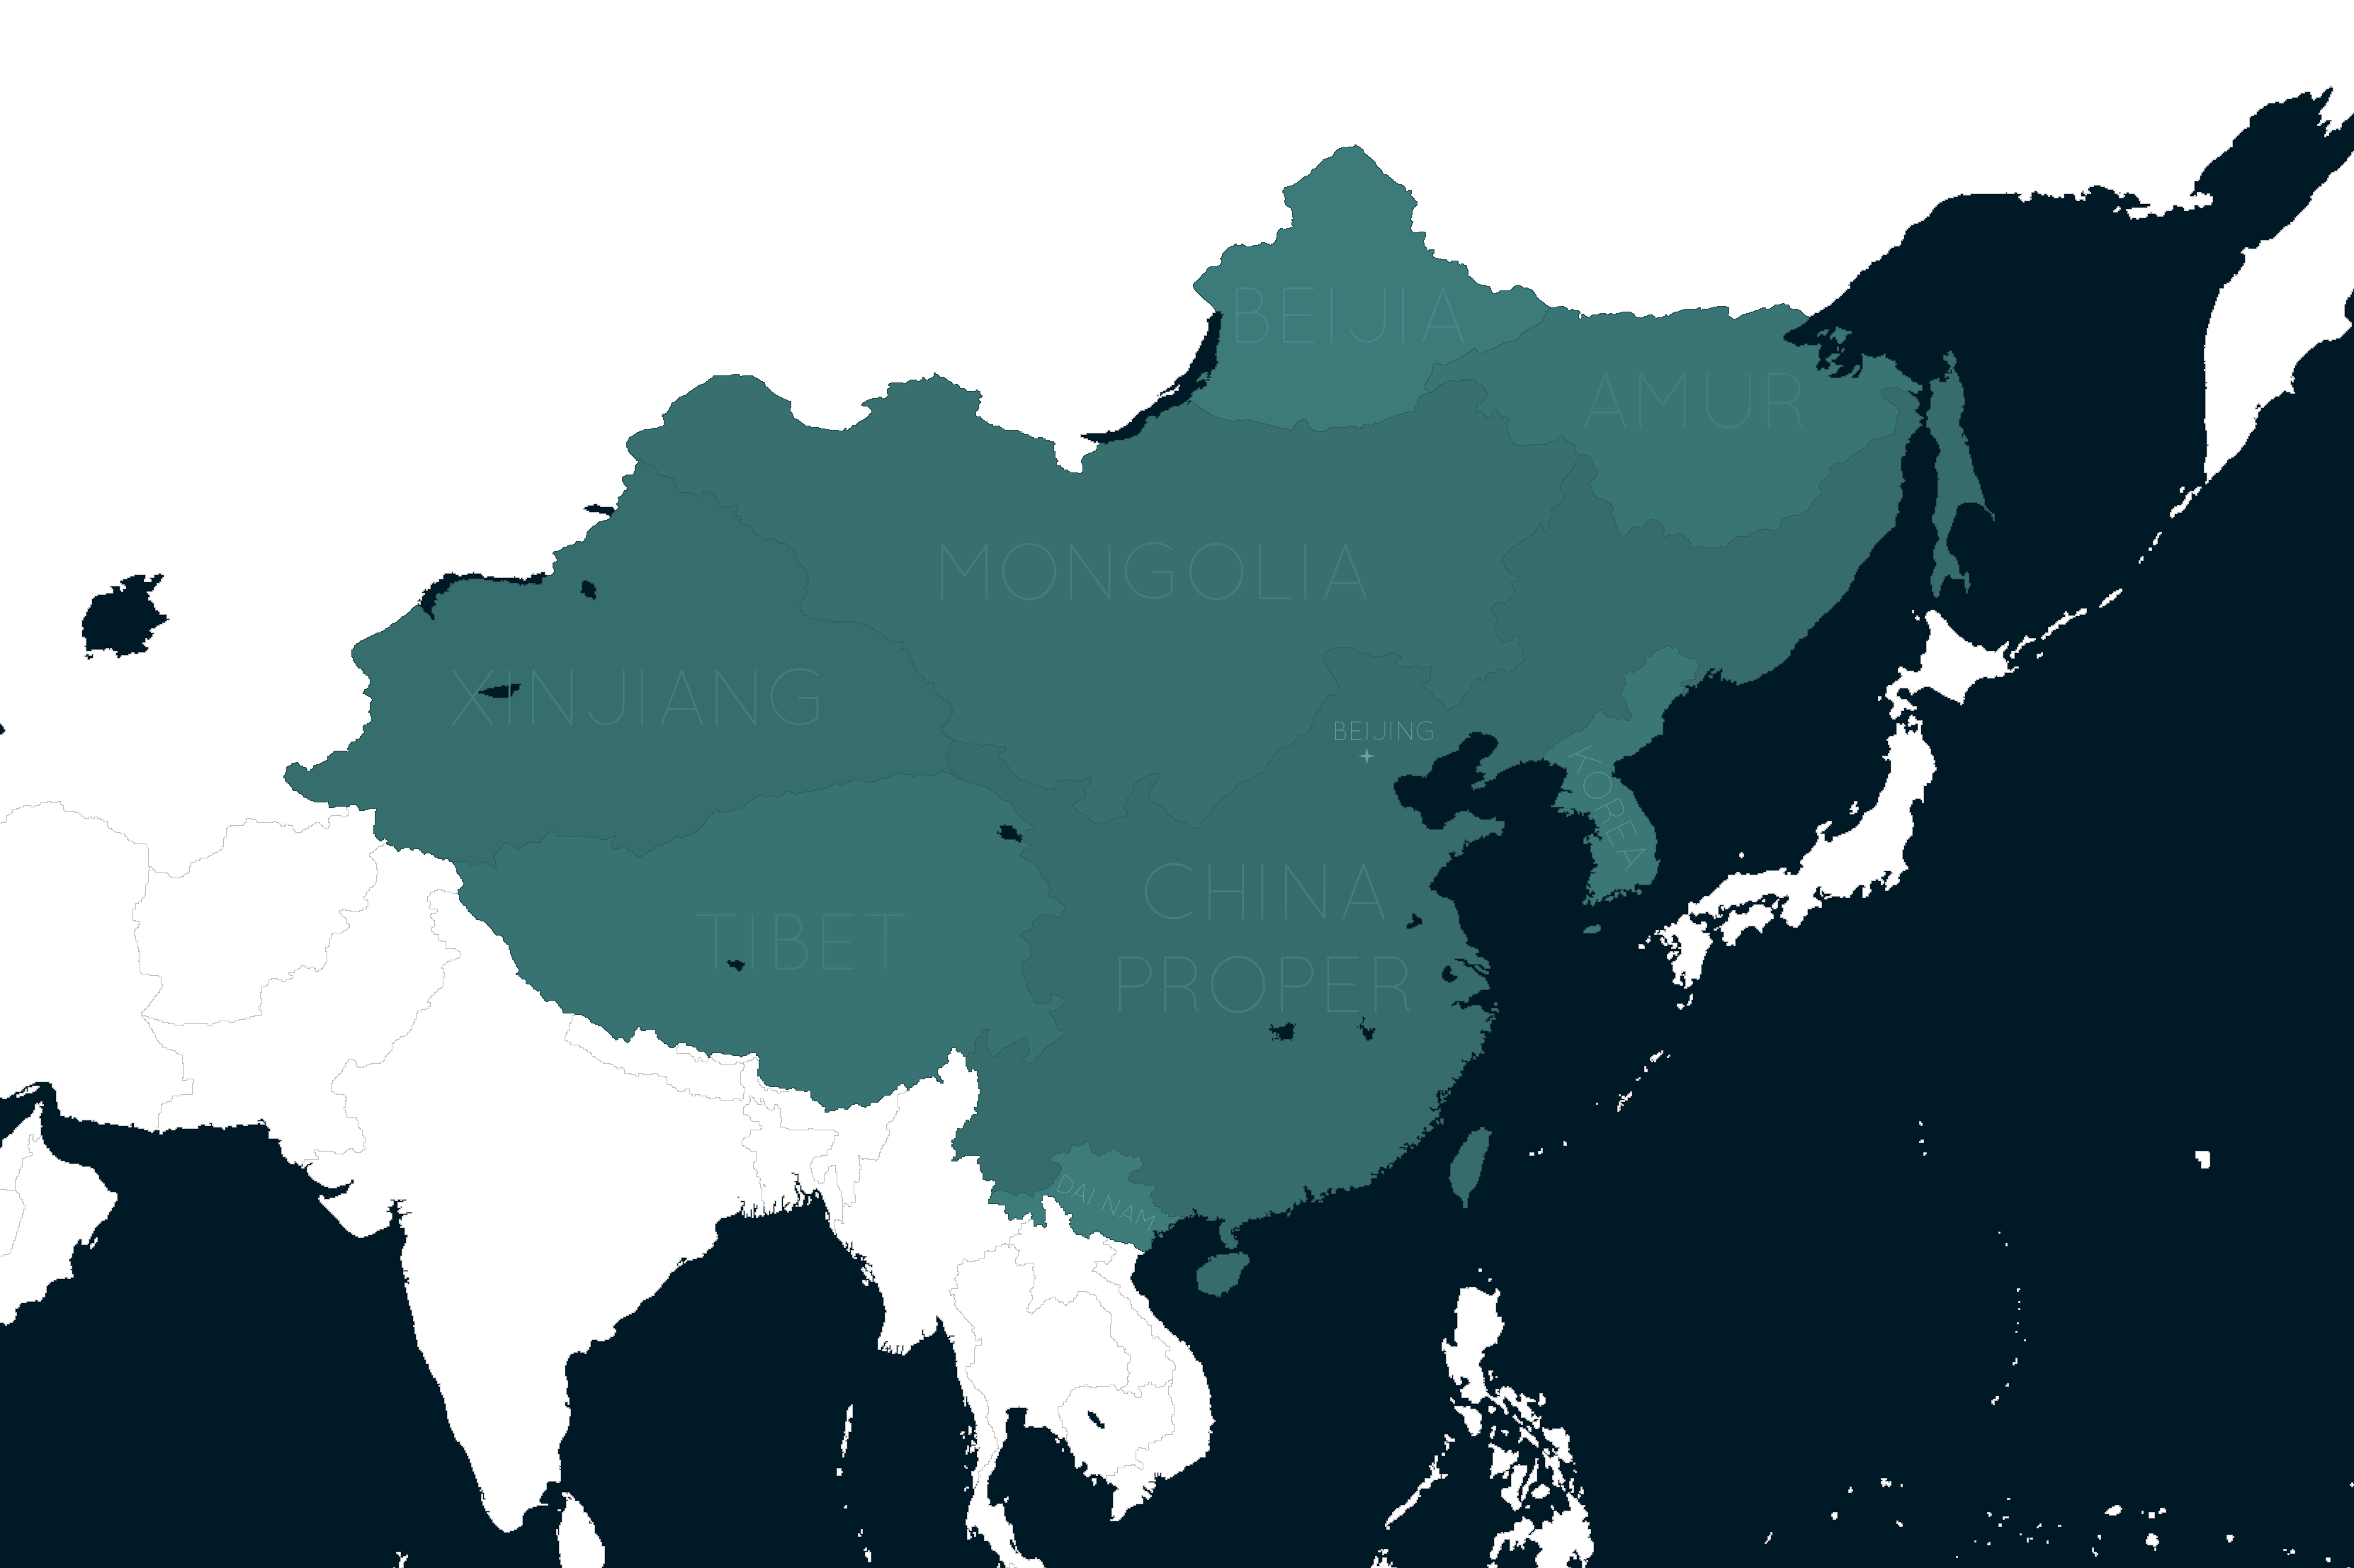 United Provinces of Greater China